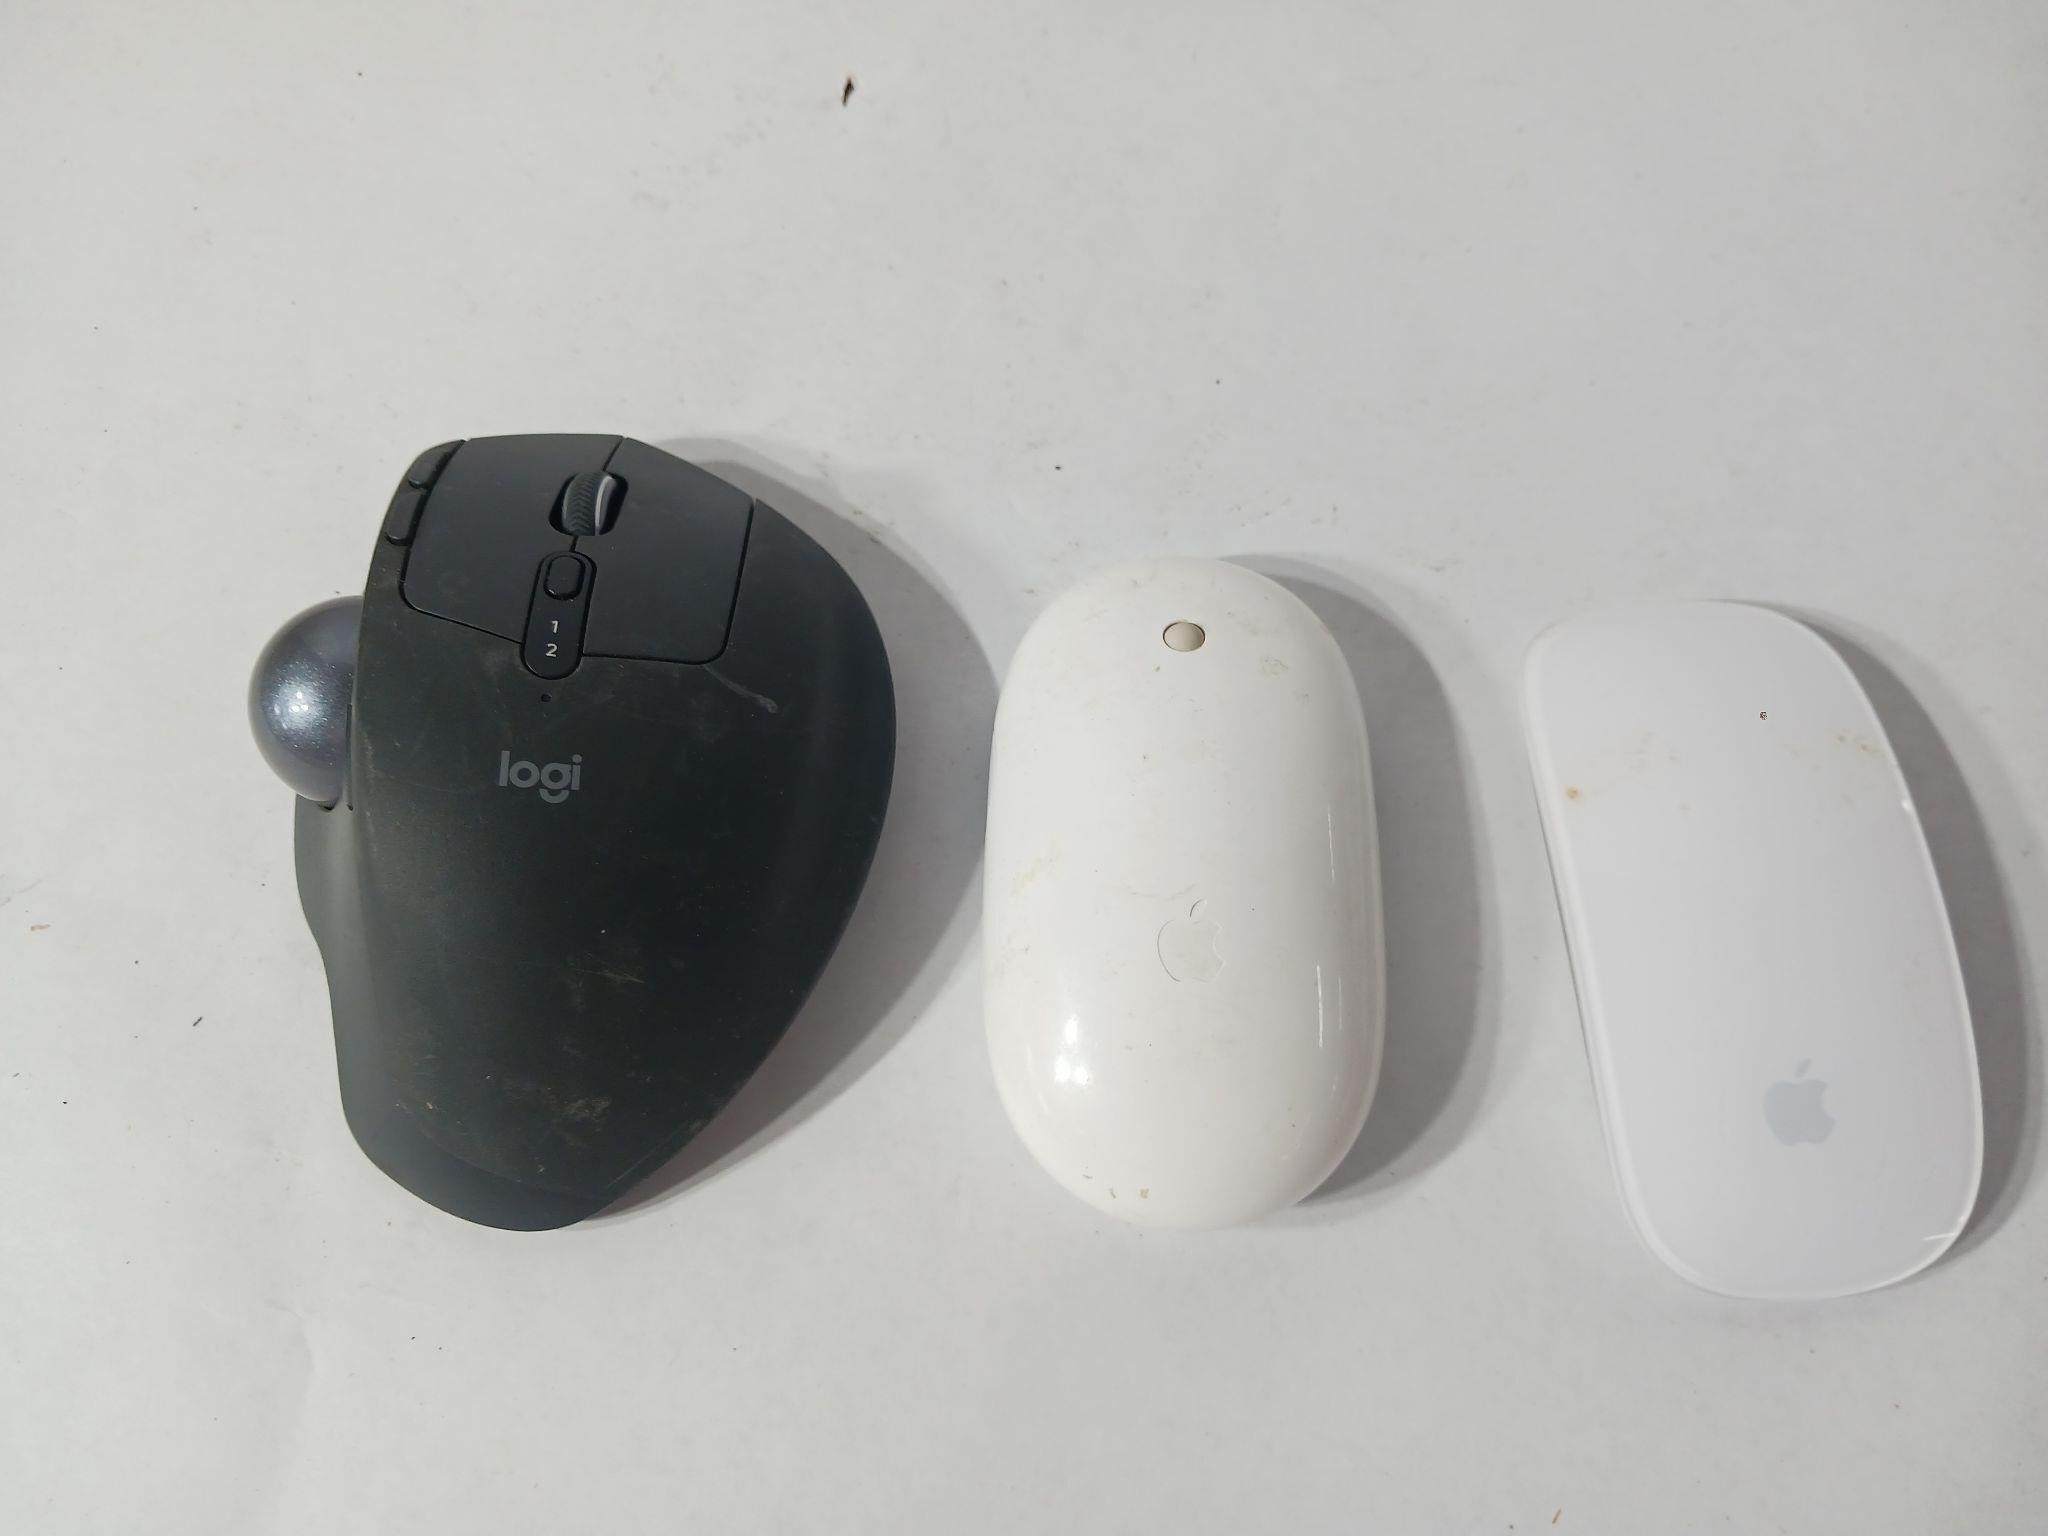 PC Acessories, 2 Apple Wireless Mice,1 Mouse